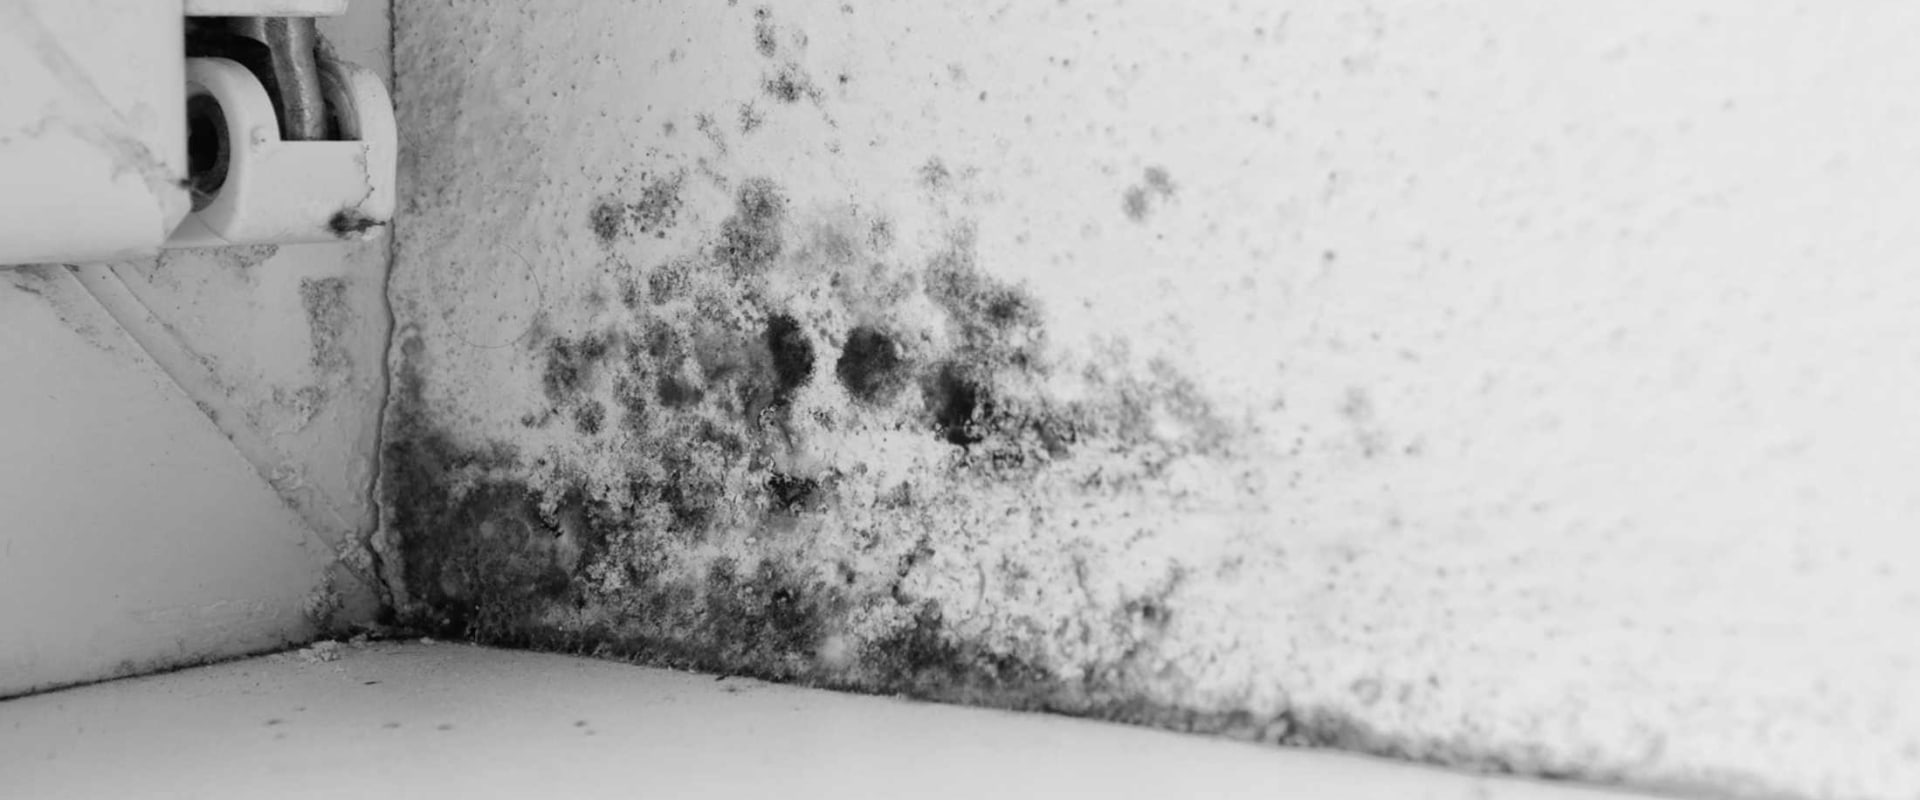 How do you get rid of black mold in a building?